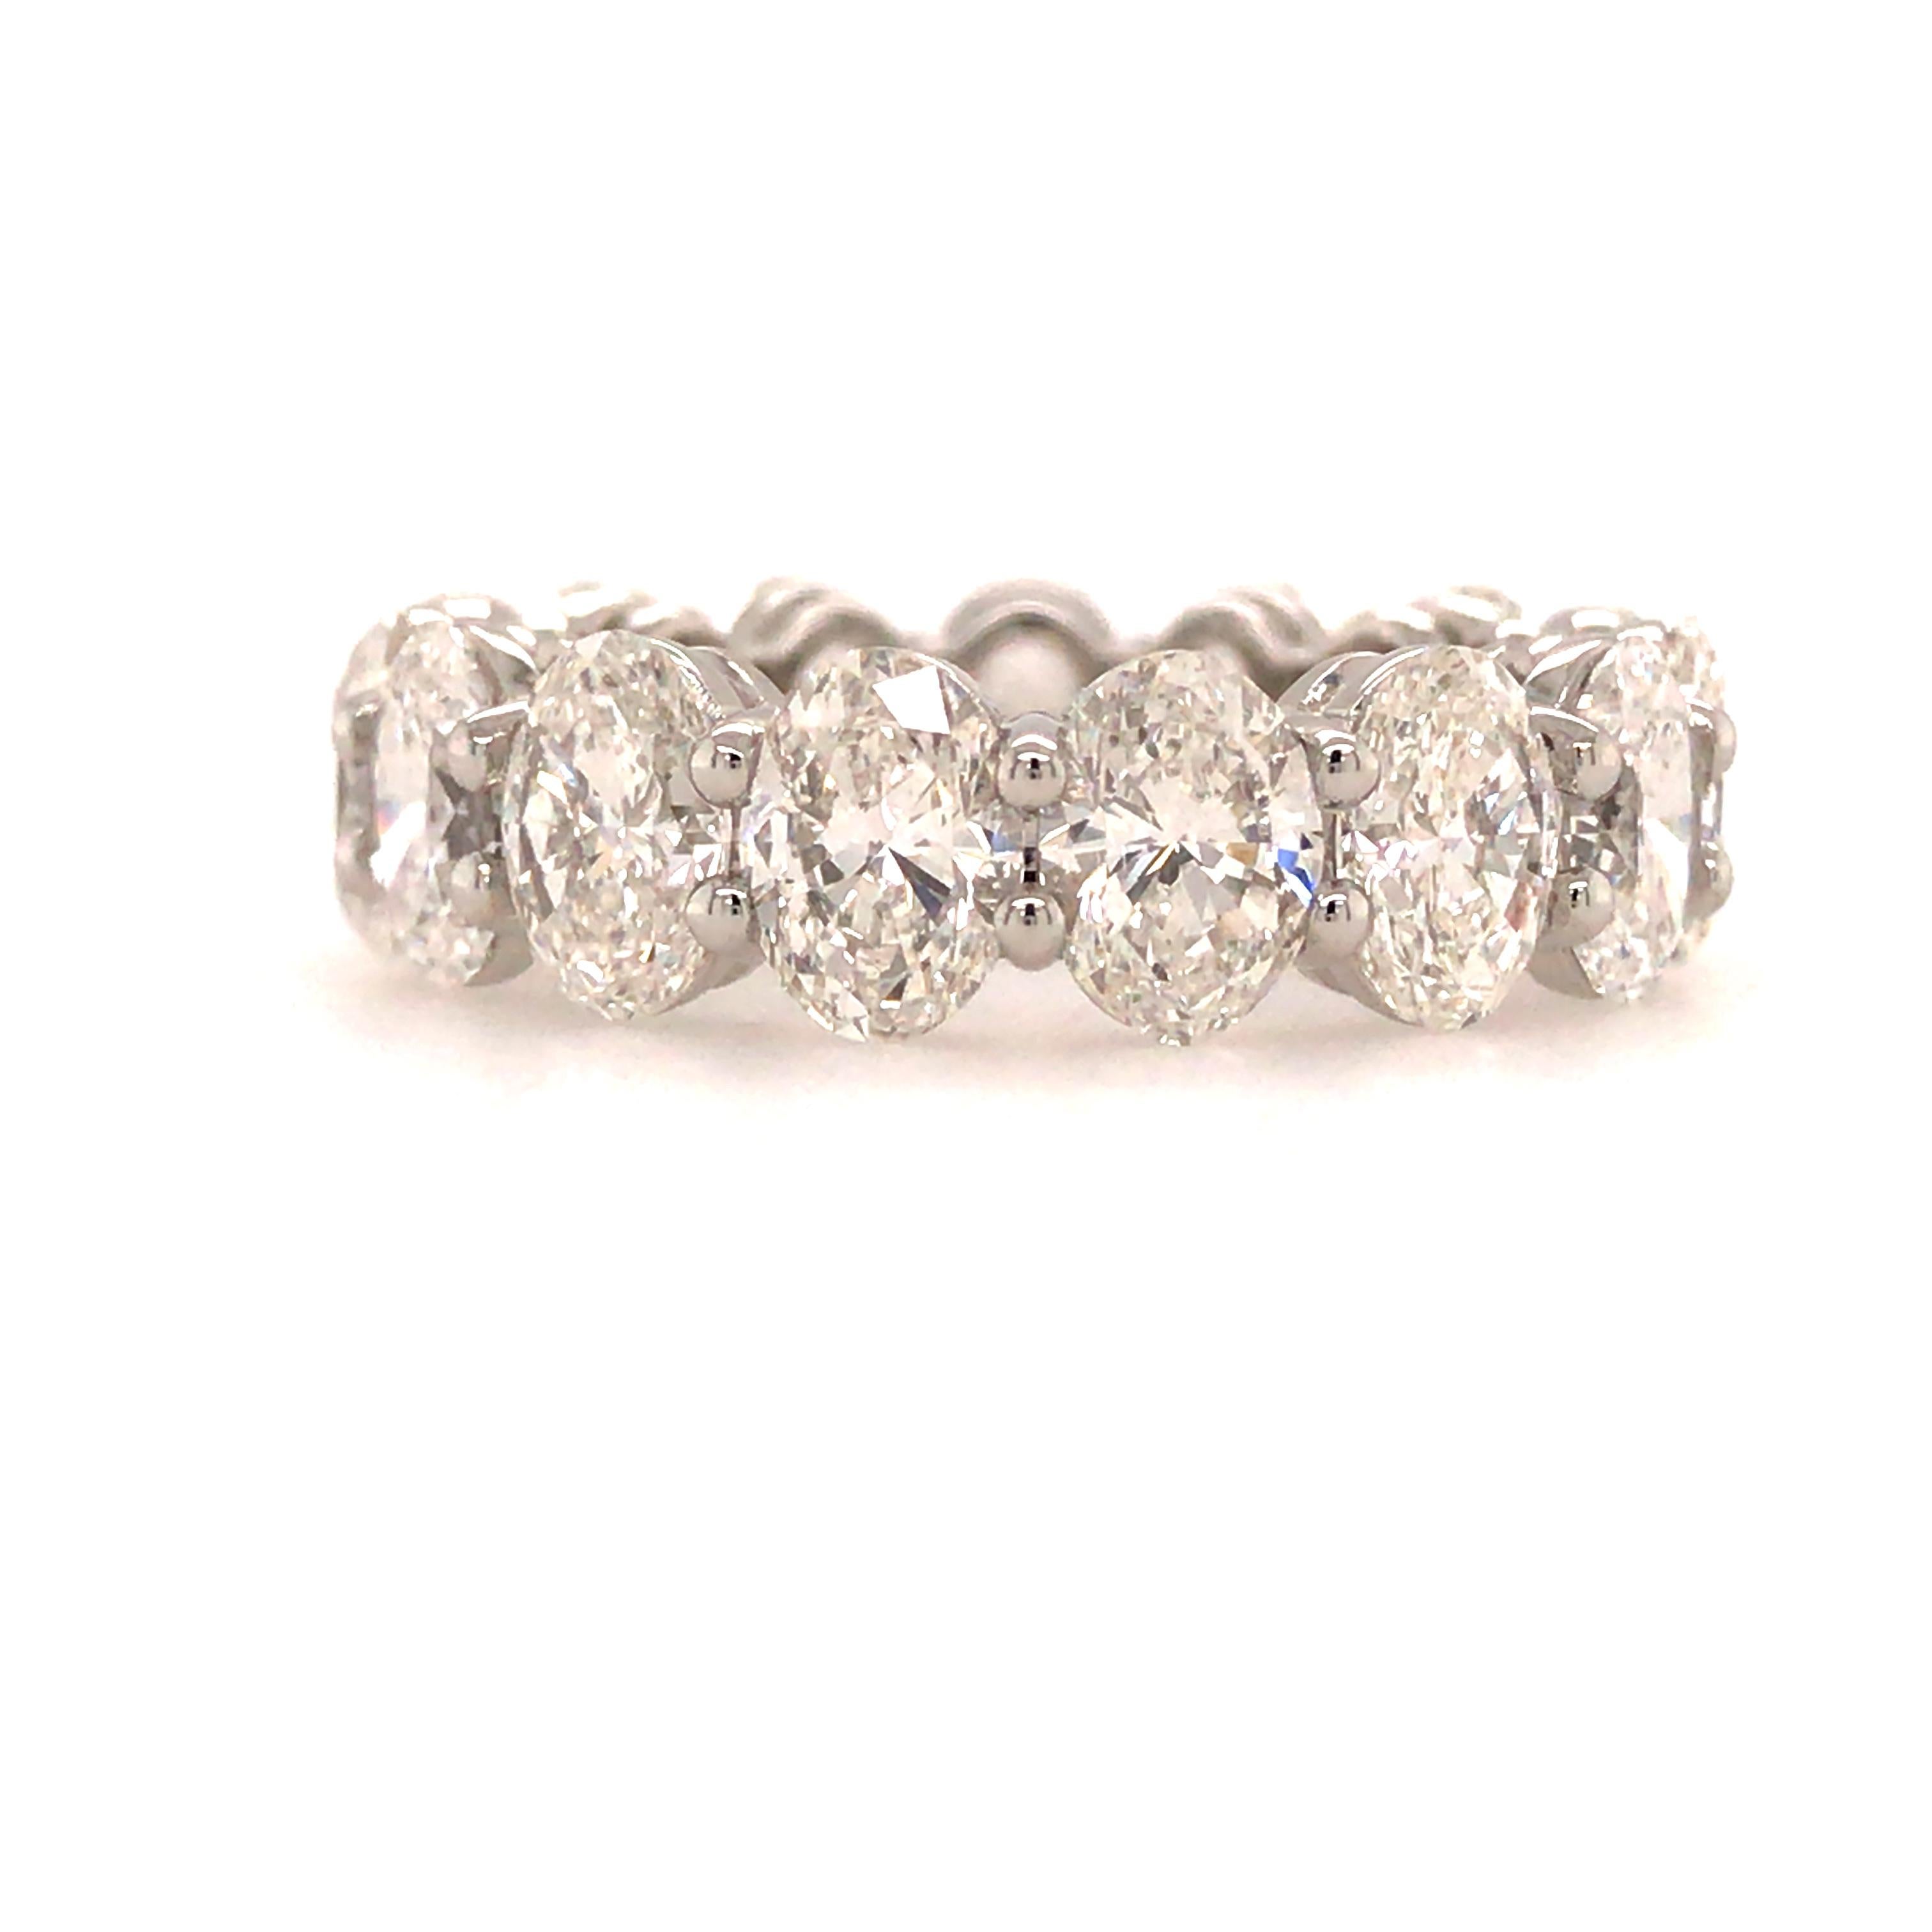 GIA Certified Oval Diamond Eternity Band in Platinum.  Each of the (15) Oval Shape Diamonds is certified by the GIA, certificates available upon request.  The Diamonds weigh 7.60 carat total weight F-G in color and VS-SI in clarity.  The band